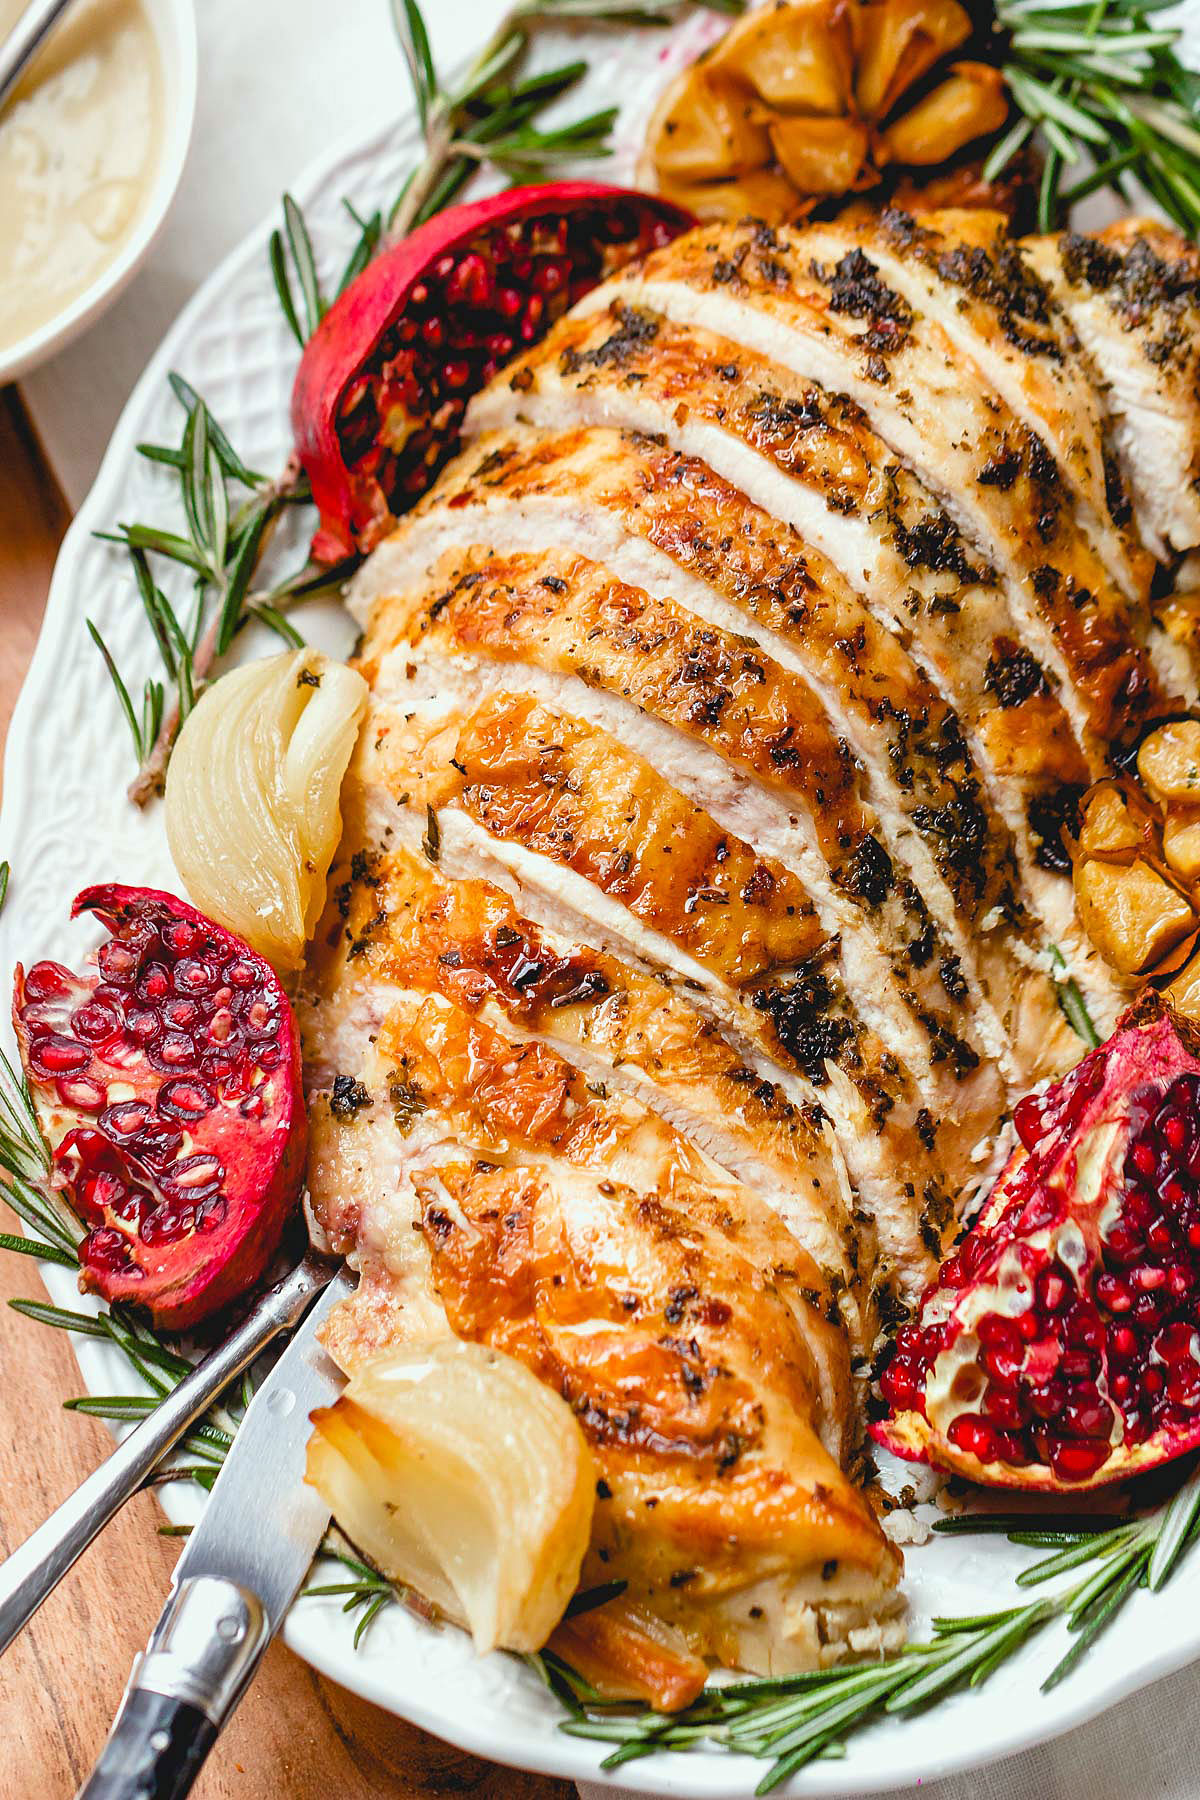 Turkey Recipes 20 Easy And Delicious Turkey Recipes For Any Occasion — Eatwell101